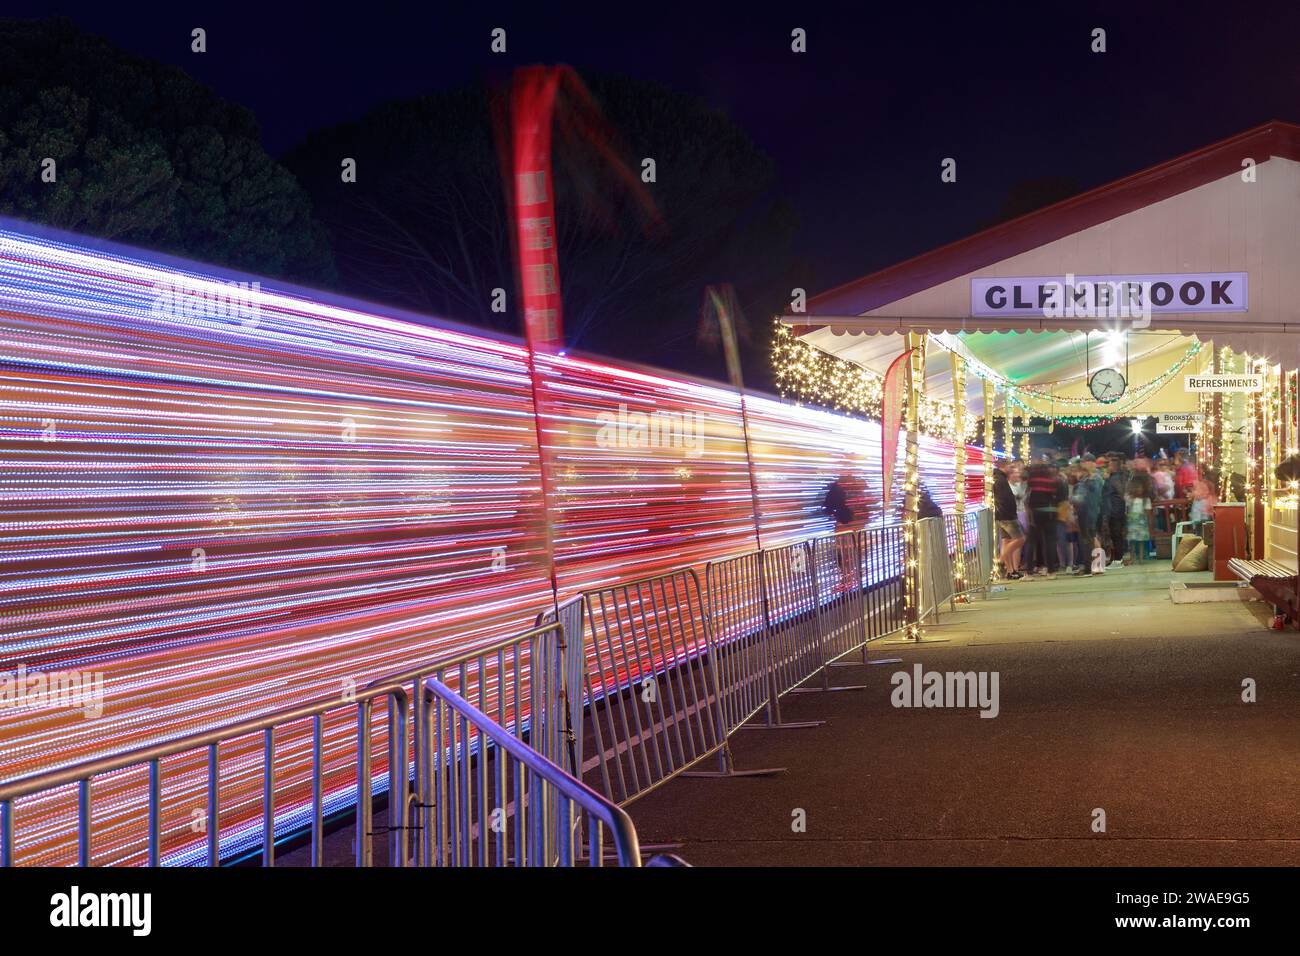 A train with Christmas lights pulls out of the station at Glenbrook Vintage Railway, Waiuku, New Zealand, creating vivid light trails Stock Photo